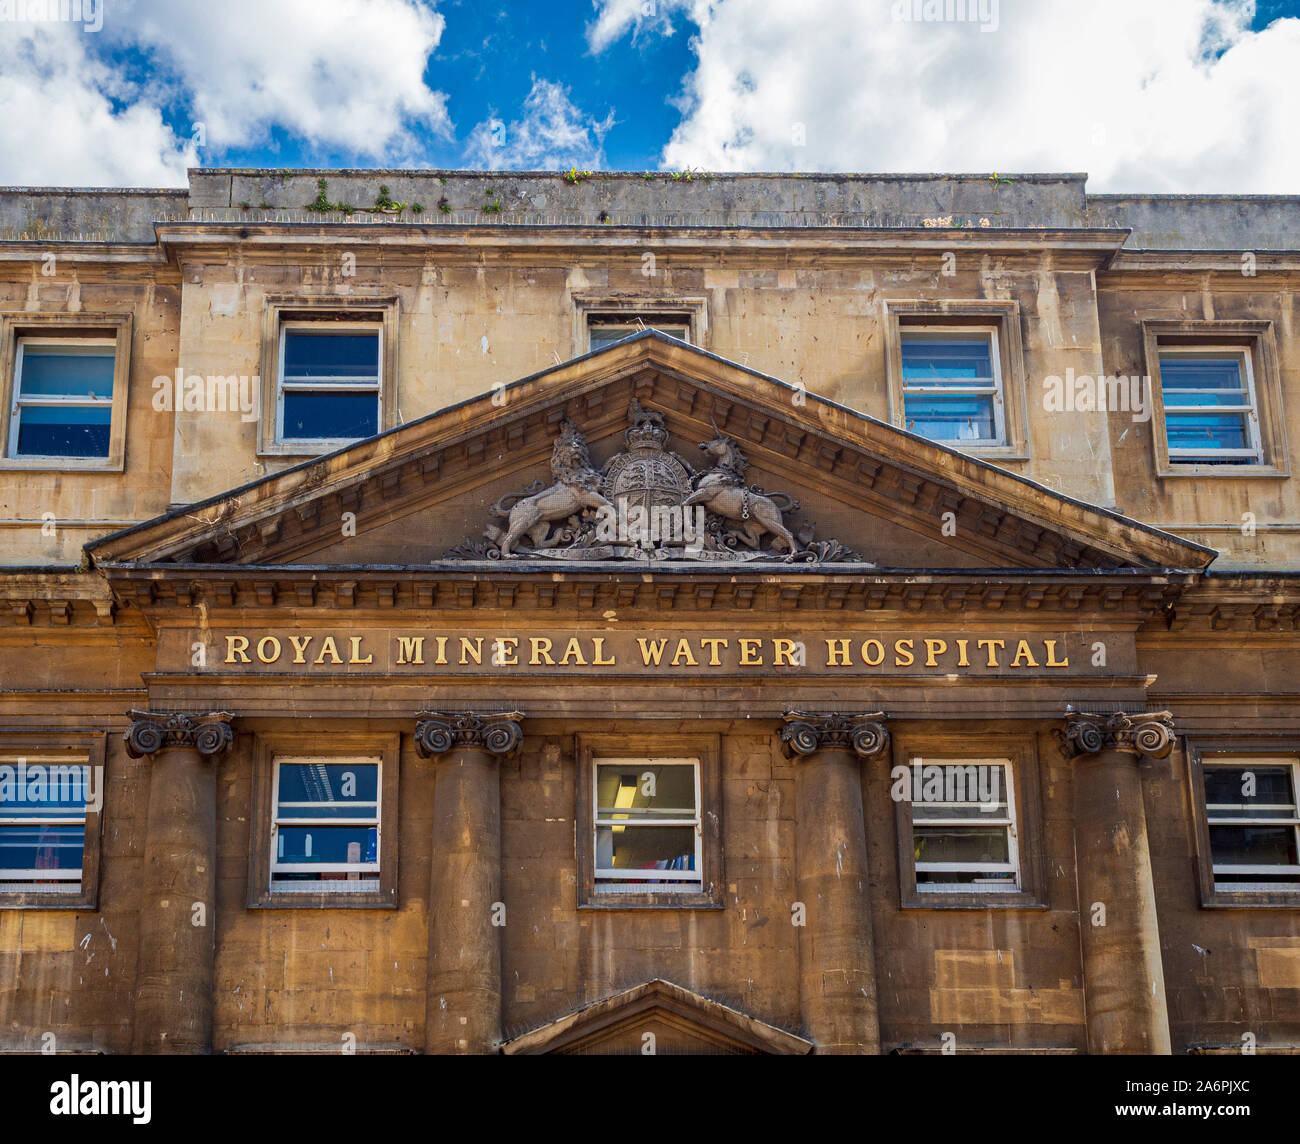 Royal Mineral Water Hospital sign on building, Bath, Somerset, UK. Stock Photo